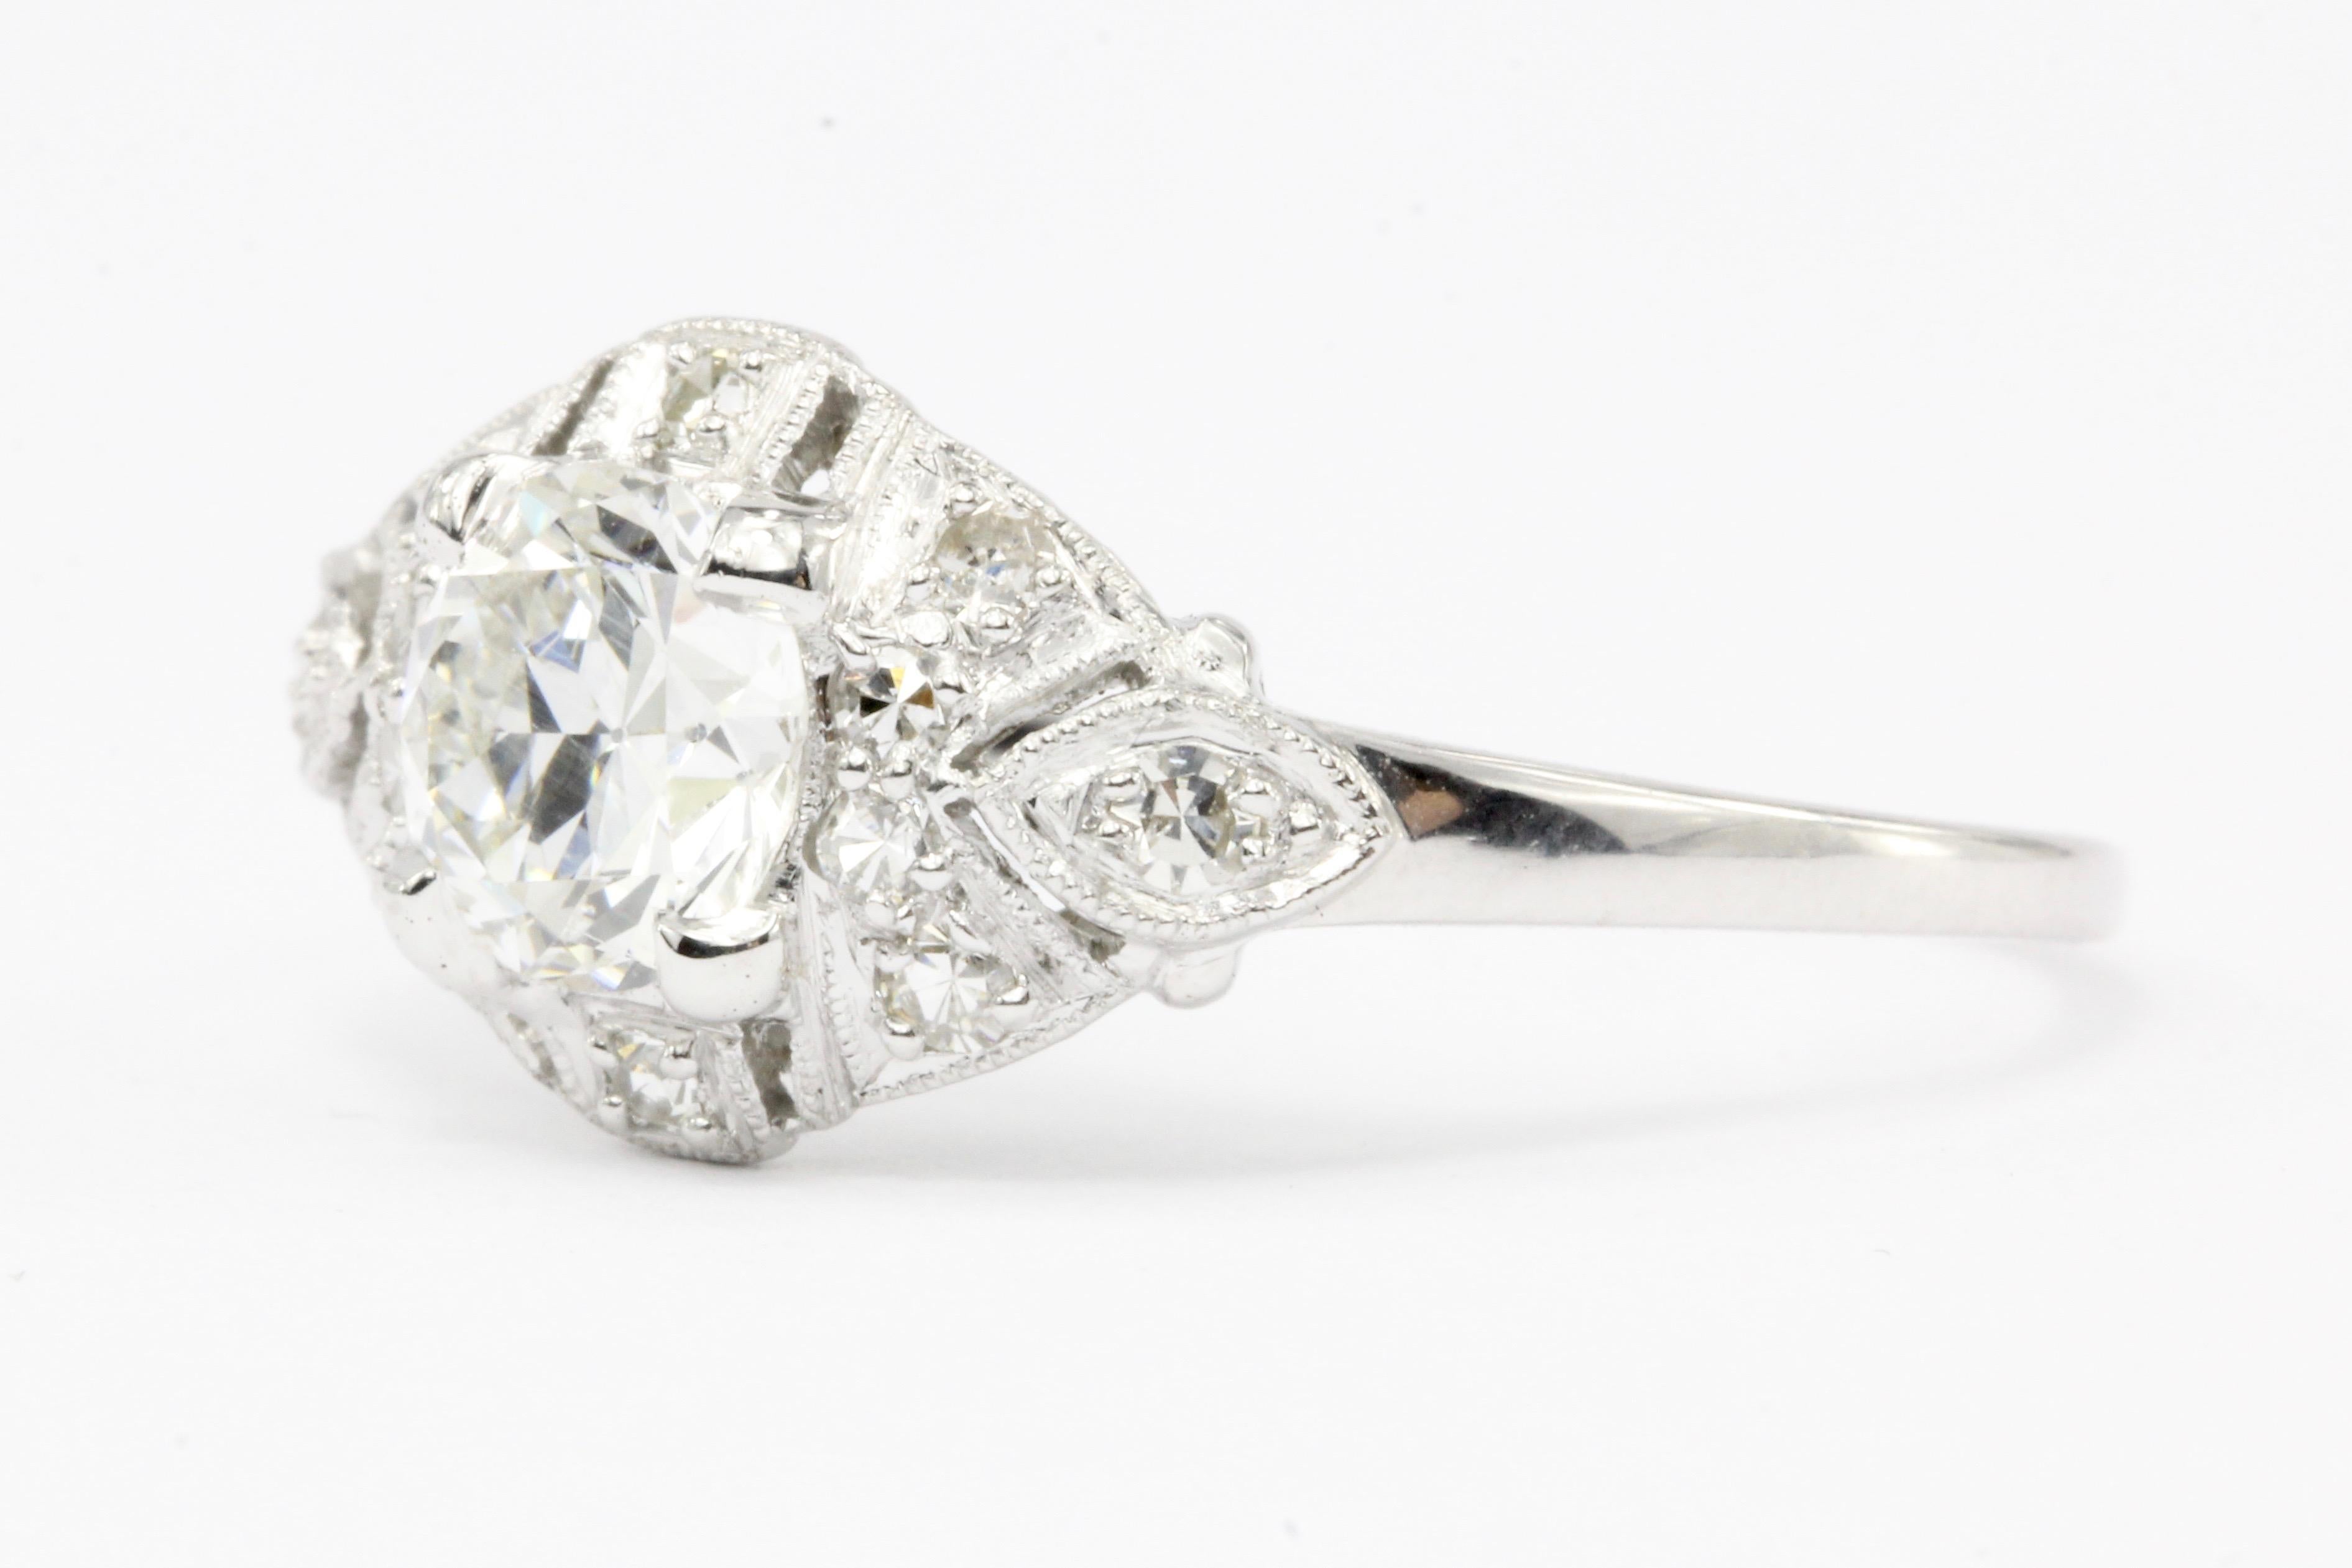 Era: Art Deco c.1920's

Composition: Platinum

Primary Stone: Old European Cut Diamond

Stone Carat: Approximately .75 carats

Color / Clarity: I - VS2

Accent Stone: Single Cut Diamonds

Color/Clarity: VS1/2 - G/H

Total Diamond Weight: